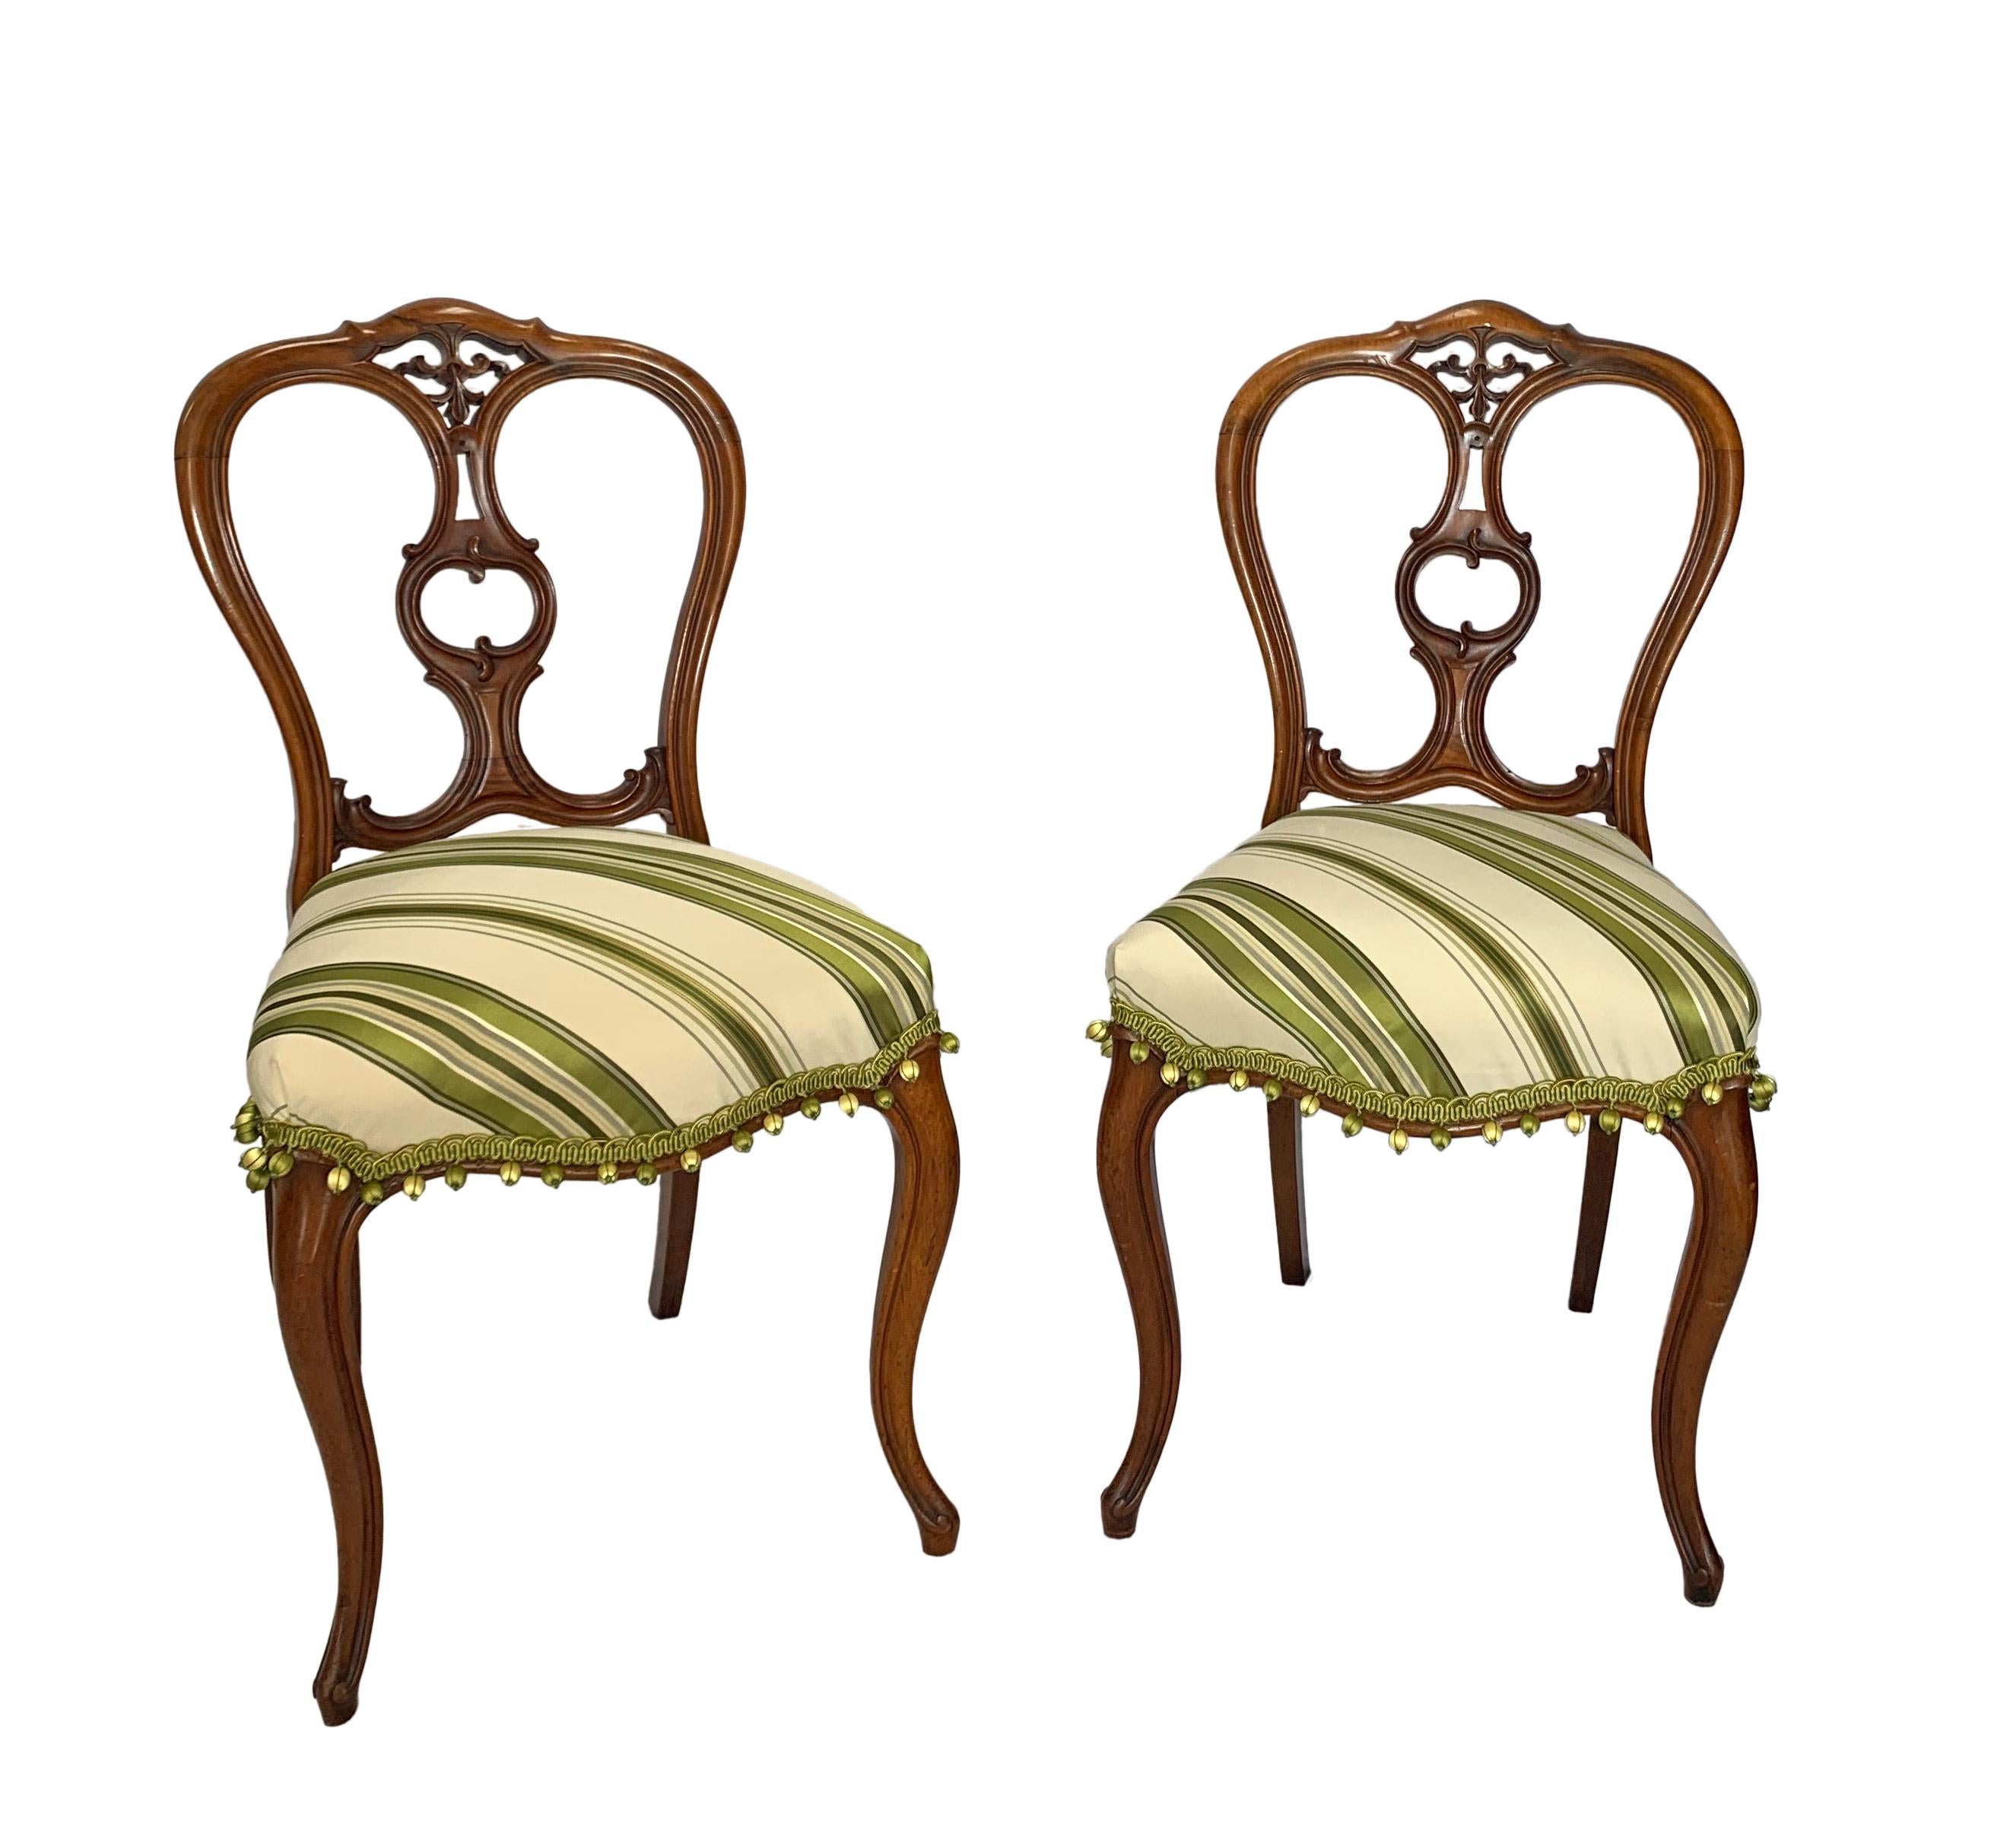 Early 20th Century Petite Victorian Style Elegantly Sculpted Balloon Back Chairs For Sale 4